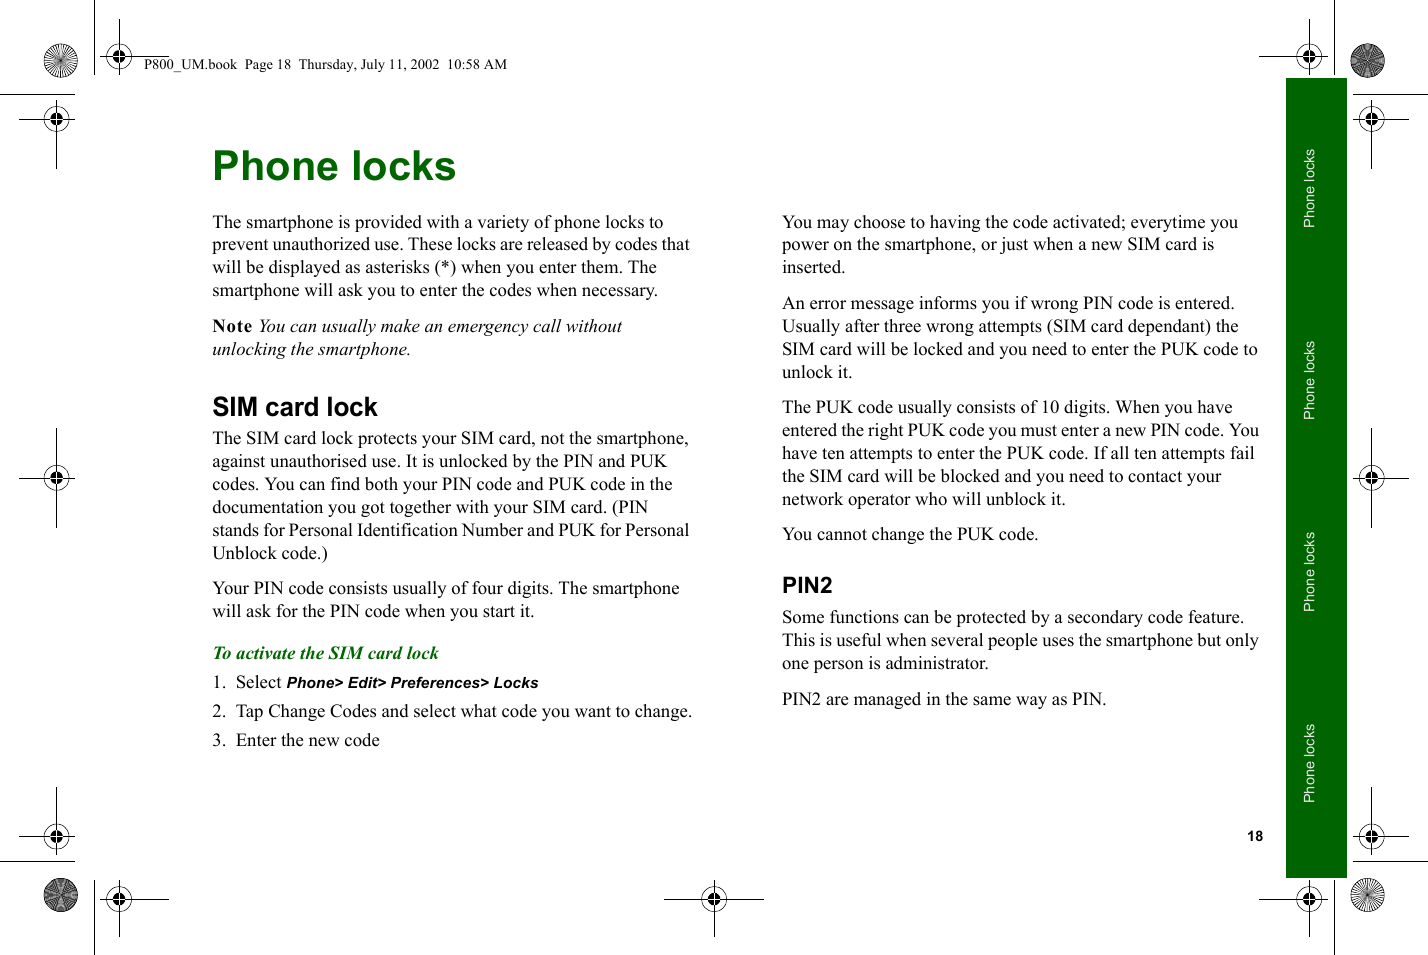 18Phone locksPhone locksPhone locksPhone locksPhone locksThe smartphone is provided with a variety of phone locks to prevent unauthorized use. These locks are released by codes that will be displayed as asterisks (*) when you enter them. The smartphone will ask you to enter the codes when necessary.Note You can usually make an emergency call without unlocking the smartphone.SIM card lockThe SIM card lock protects your SIM card, not the smartphone, against unauthorised use. It is unlocked by the PIN and PUK codes. You can find both your PIN code and PUK code in the documentation you got together with your SIM card. (PIN stands for Personal Identification Number and PUK for Personal Unblock code.)Your PIN code consists usually of four digits. The smartphone will ask for the PIN code when you start it.To activate the SIM card lock1. Select Phone&gt; Edit&gt; Preferences&gt; Locks2. Tap Change Codes and select what code you want to change.3. Enter the new codeYou may choose to having the code activated; everytime you power on the smartphone, or just when a new SIM card is inserted.An error message informs you if wrong PIN code is entered. Usually after three wrong attempts (SIM card dependant) the SIM card will be locked and you need to enter the PUK code to unlock it.The PUK code usually consists of 10 digits. When you have entered the right PUK code you must enter a new PIN code. You have ten attempts to enter the PUK code. If all ten attempts fail the SIM card will be blocked and you need to contact your network operator who will unblock it.You cannot change the PUK code.PIN2Some functions can be protected by a secondary code feature. This is useful when several people uses the smartphone but only one person is administrator.PIN2 are managed in the same way as PIN.P800_UM.book  Page 18  Thursday, July 11, 2002  10:58 AM